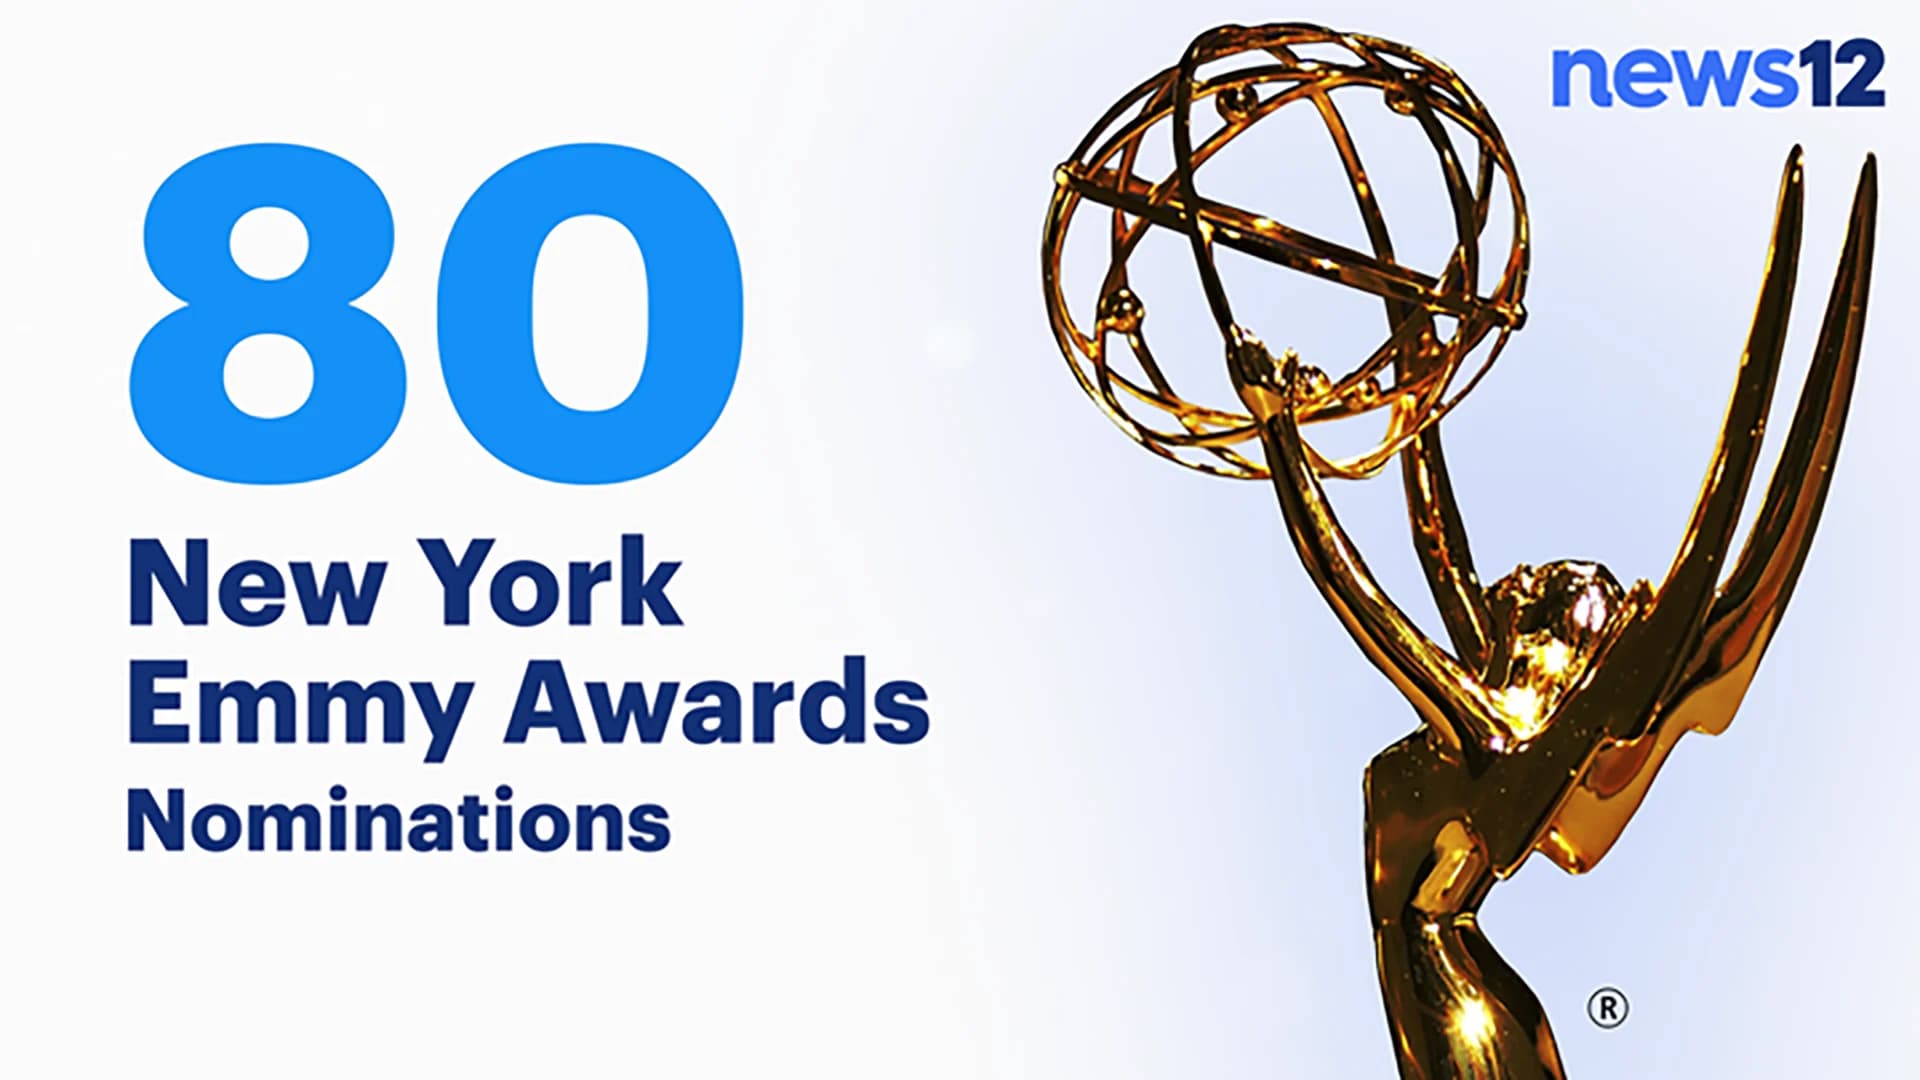 News 12 Networks Receives Market Leading 80 New York Emmy Award® Nominations